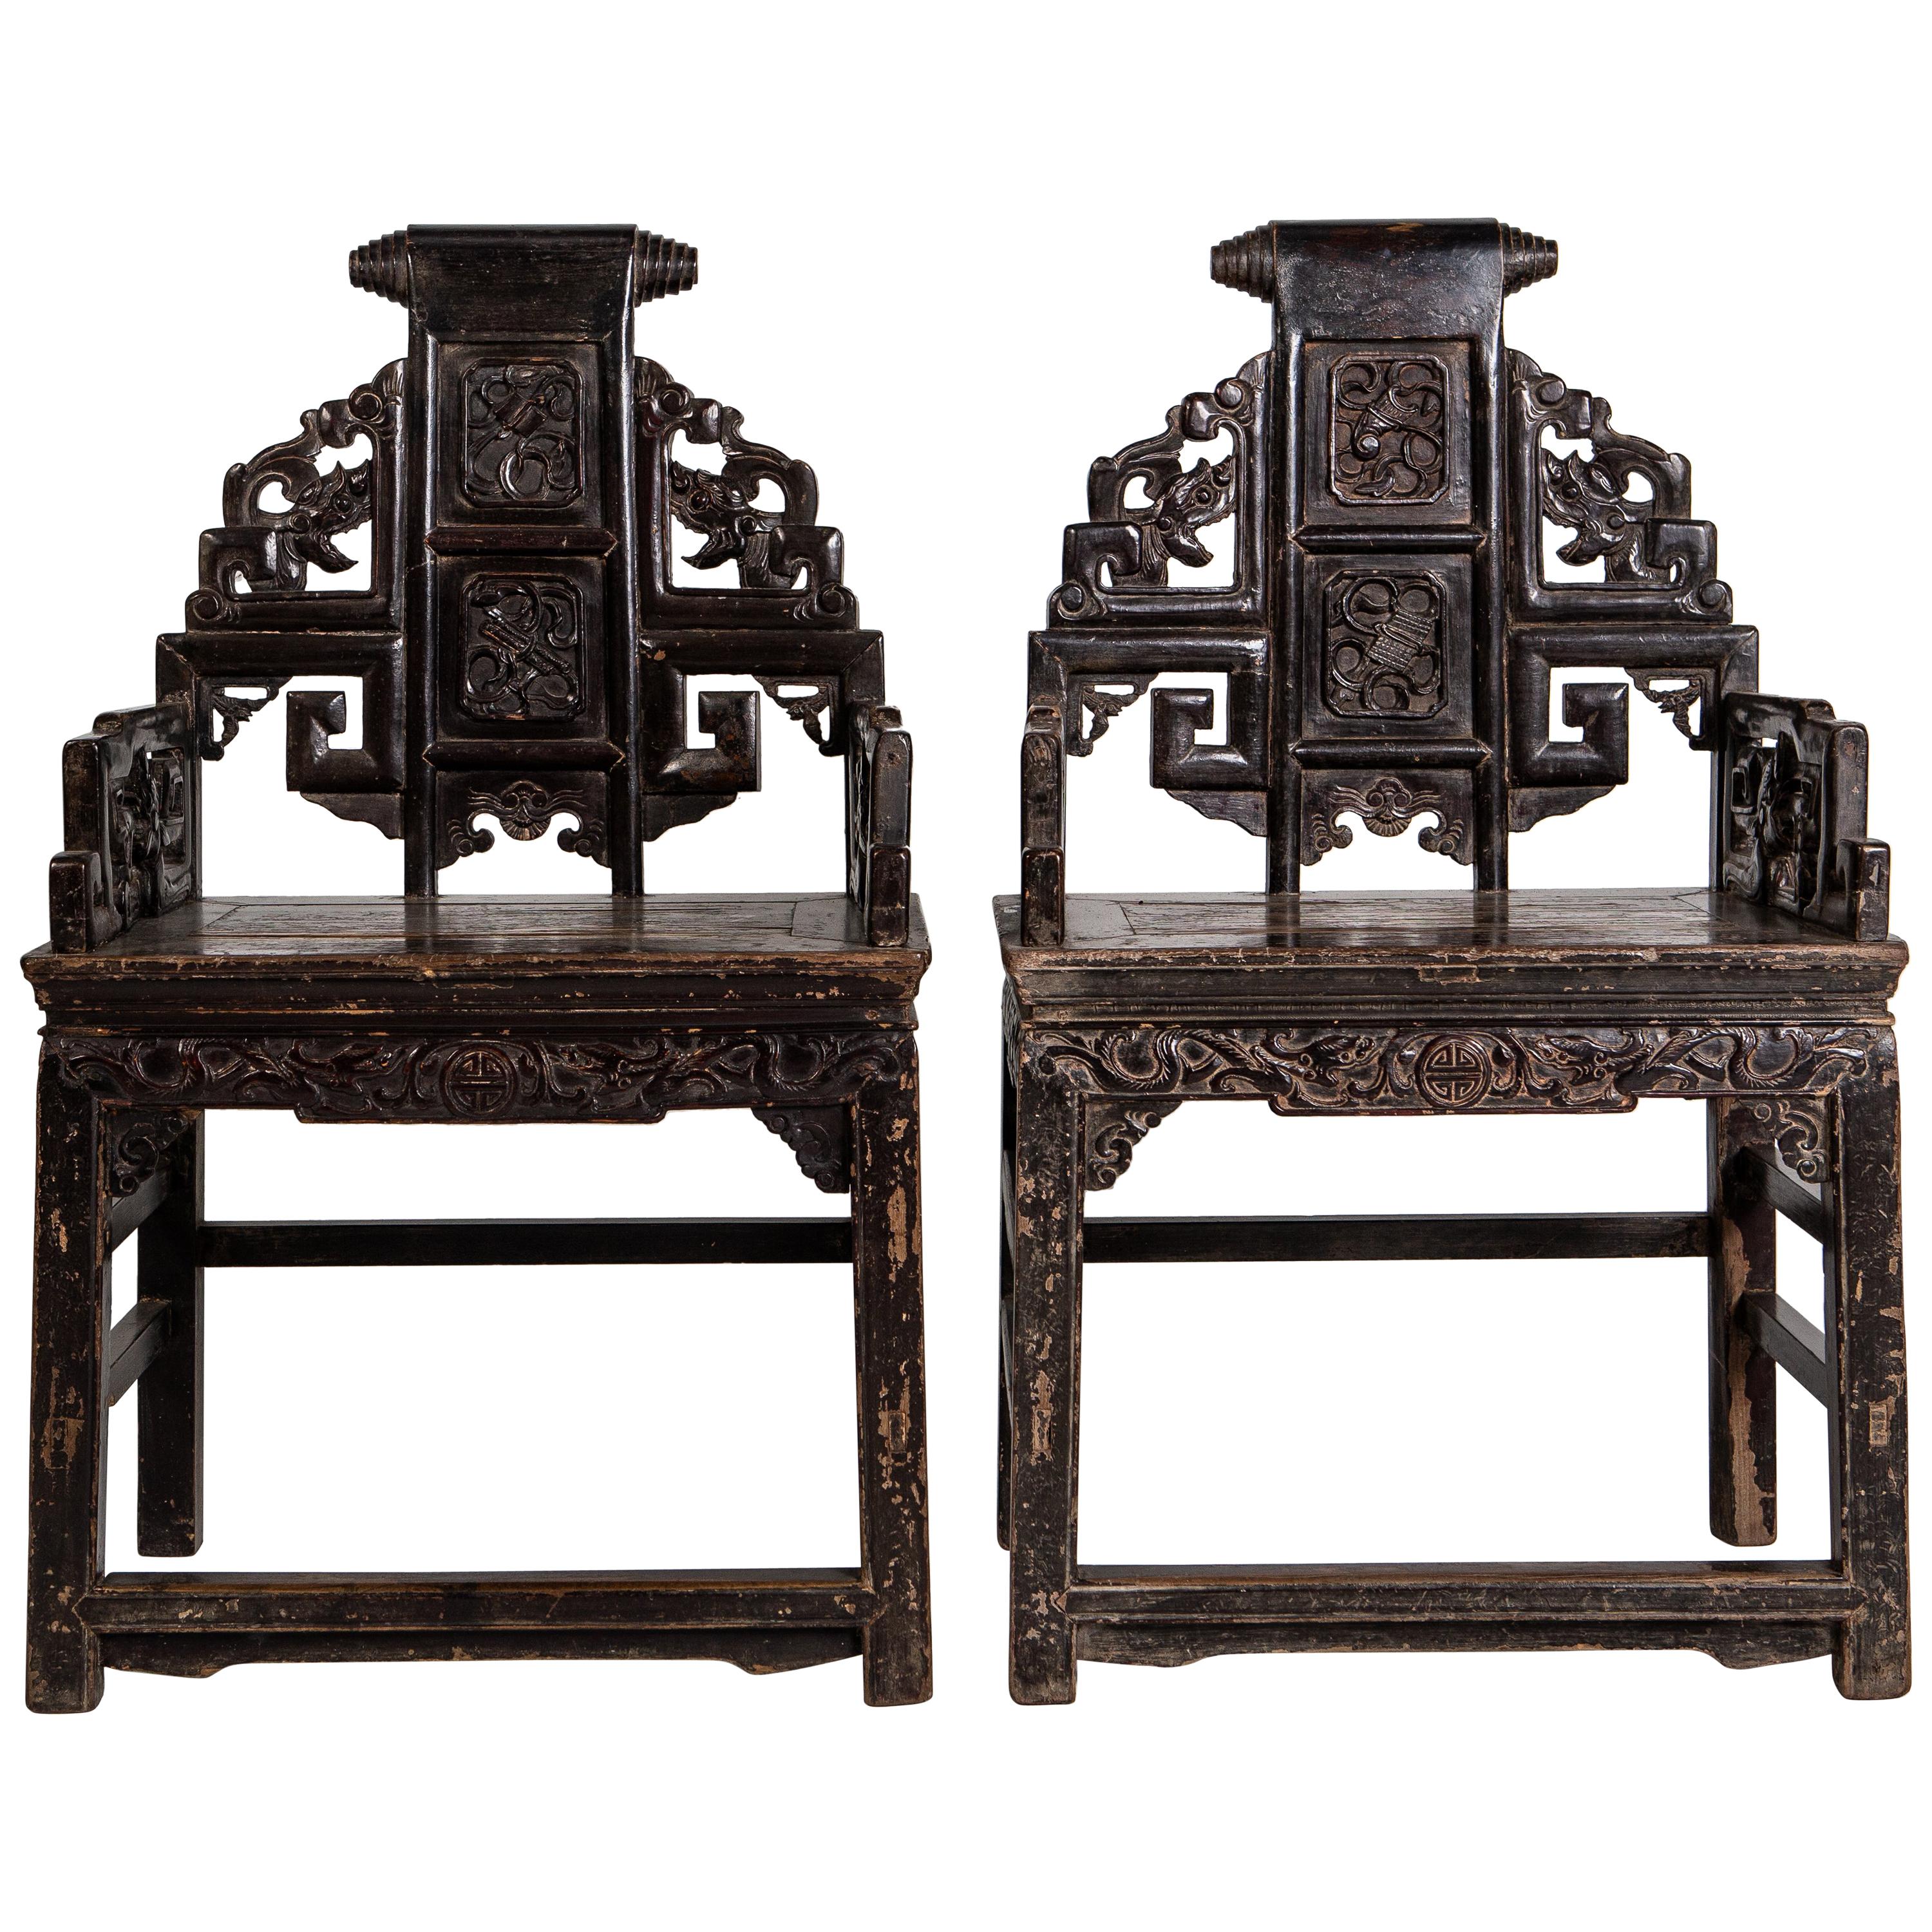 Pair of Qing Dynasty Armchairs